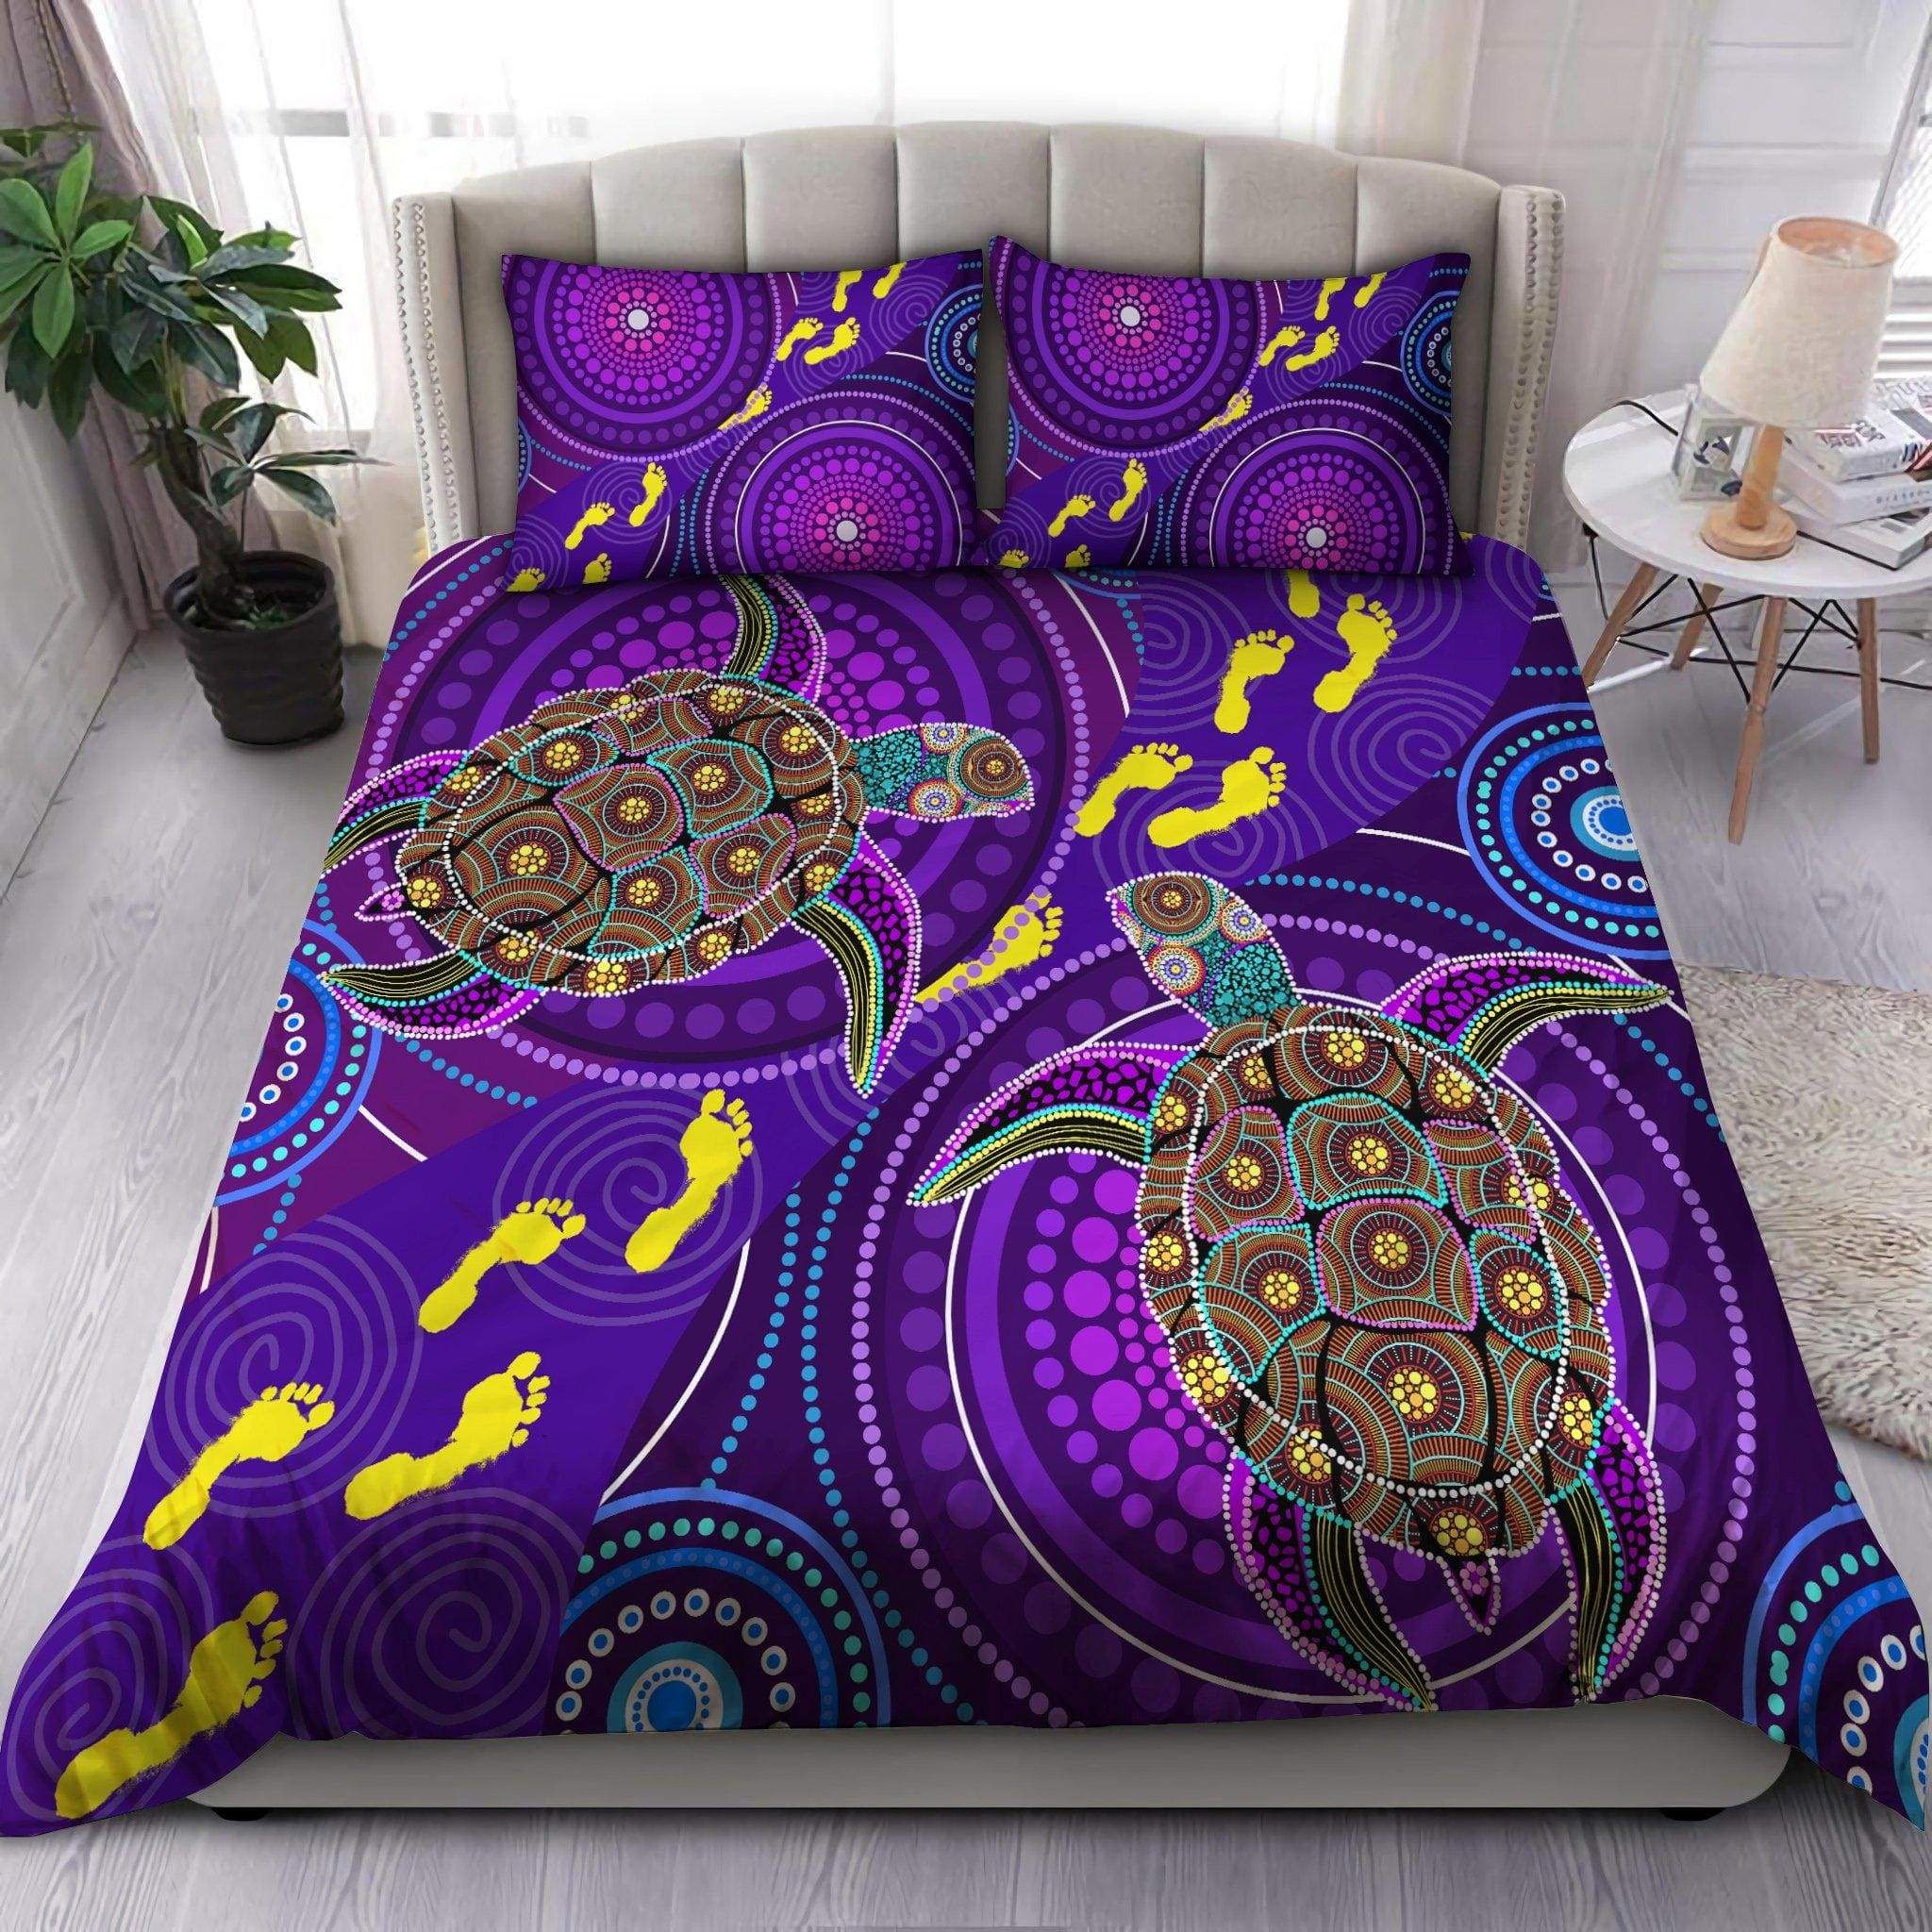 Purple Turtle With Footprint Duvet Cover Bedding Set